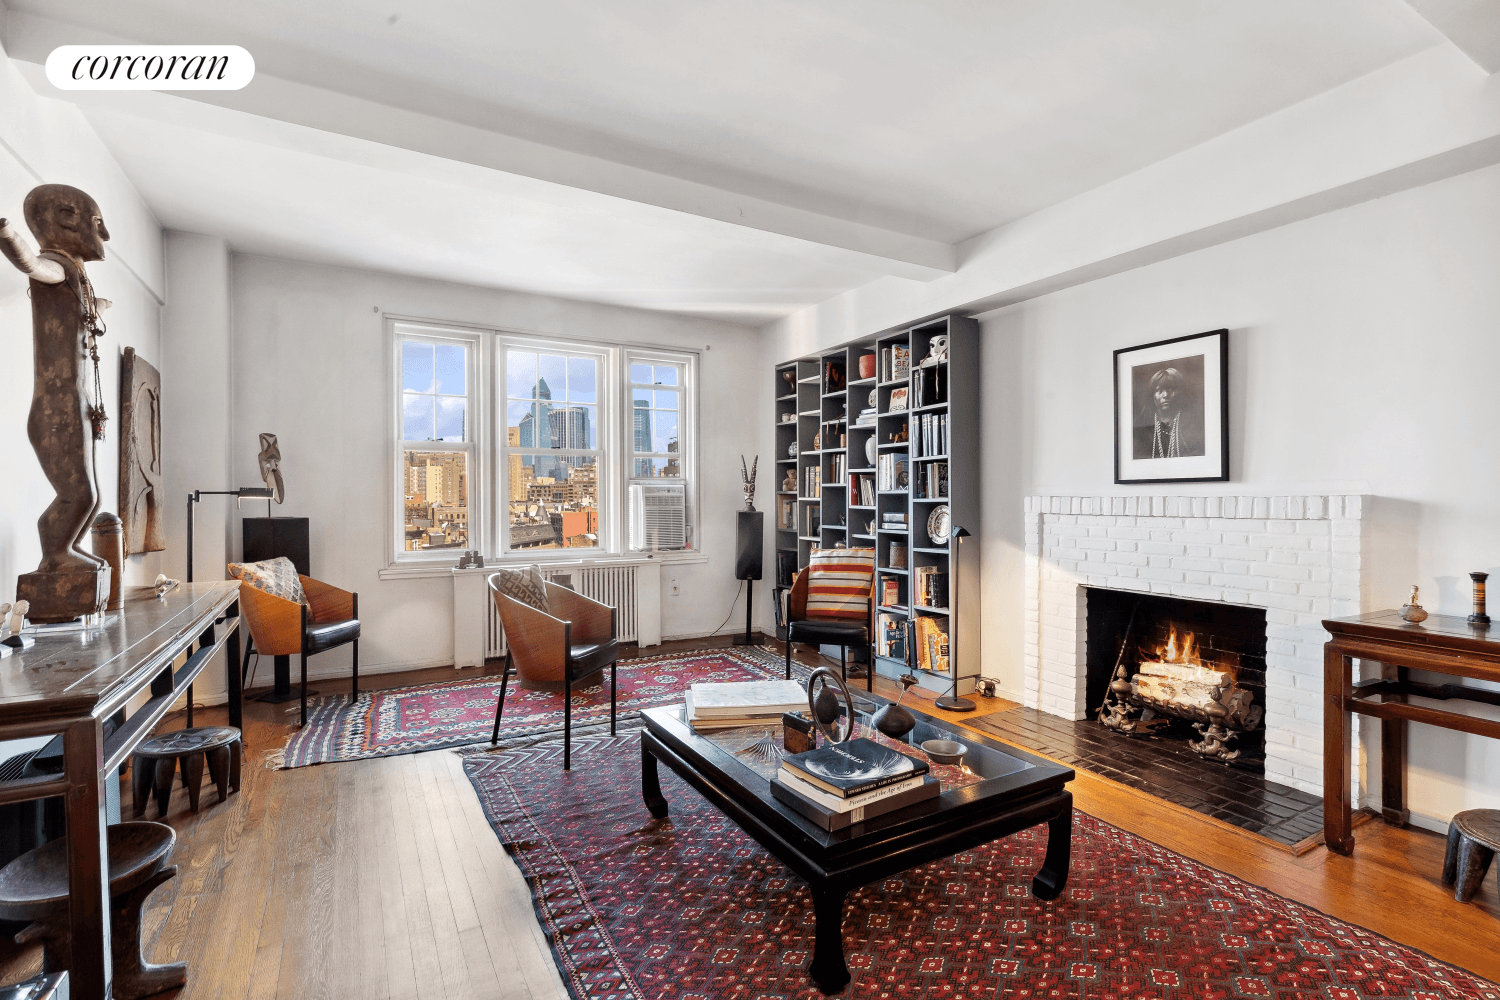 Apartment 10A is a rarely available corner apartment within the historic charm of 45 Christopher Street, a stunning prewar condominium in the heart of the West Village.